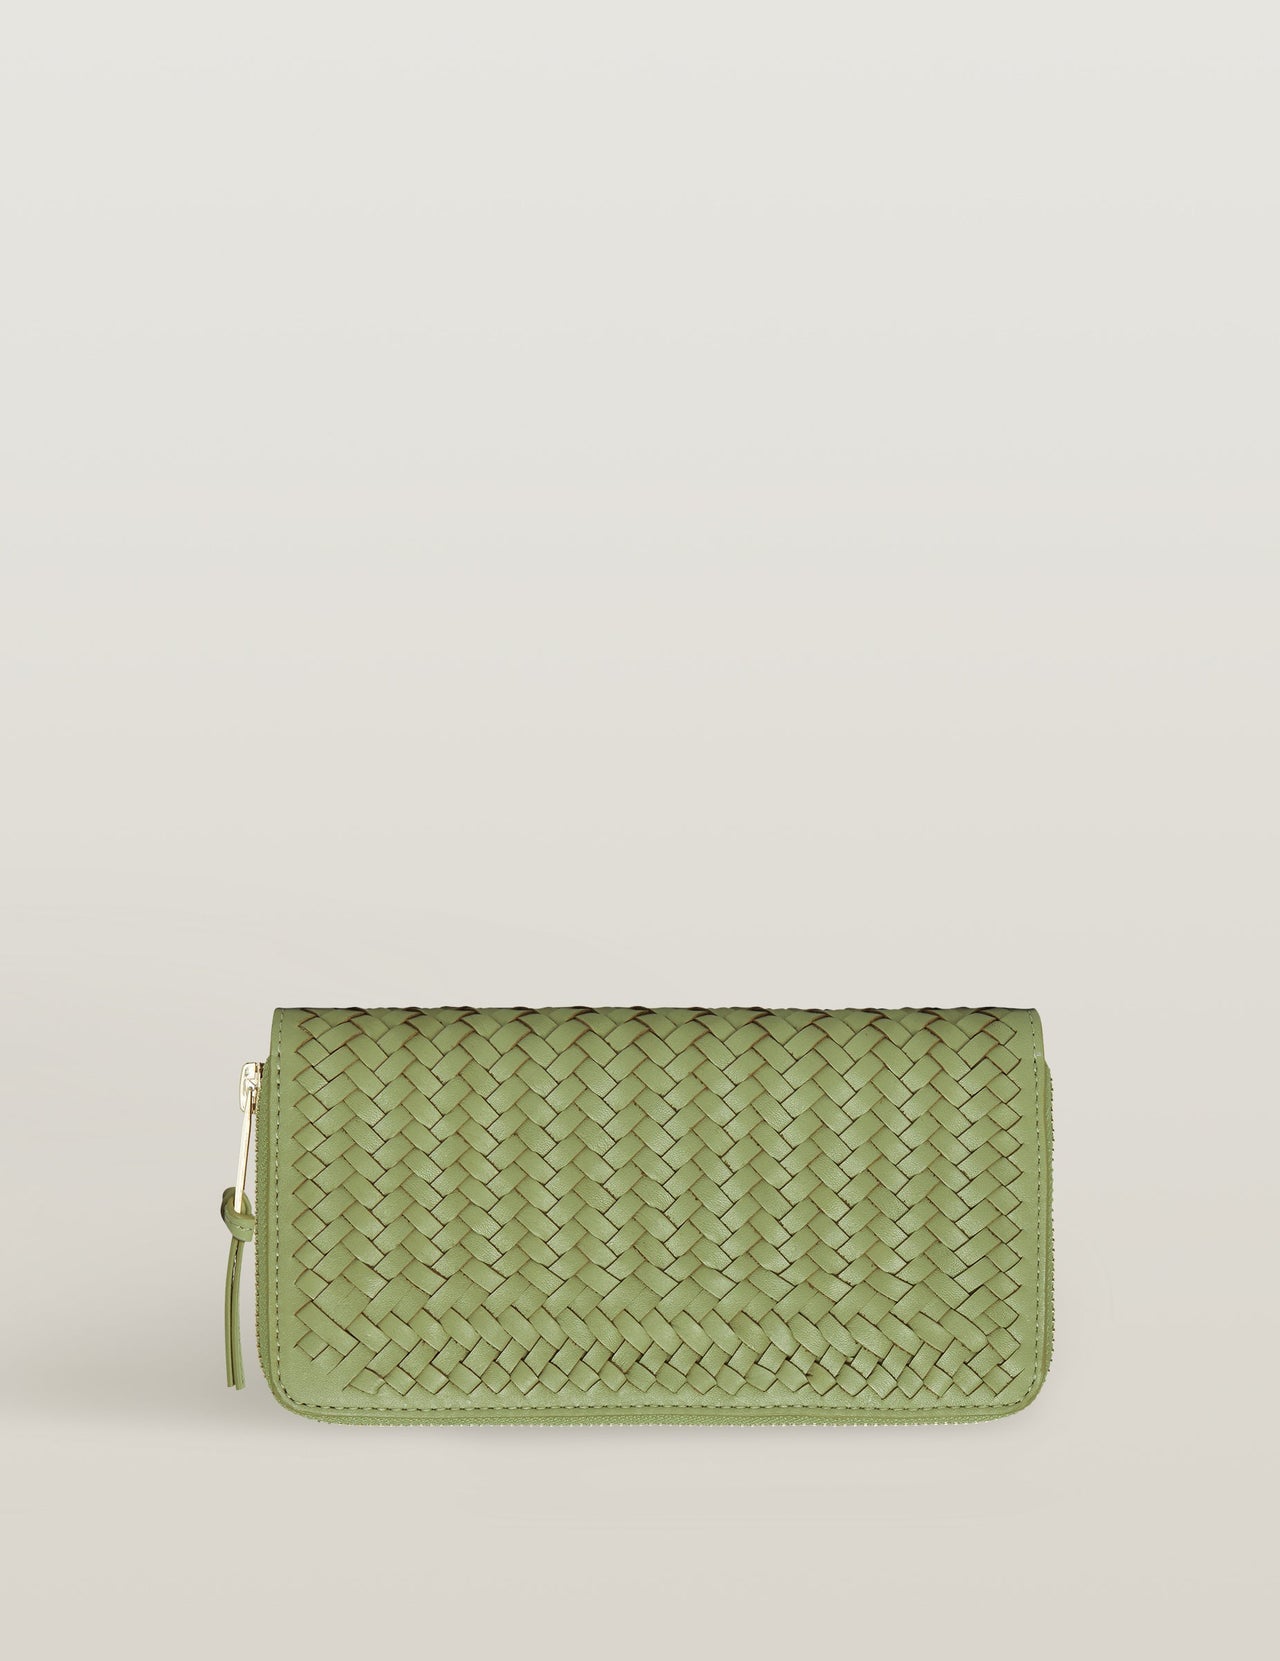  Sage Handwoven Large Leather Wallet 